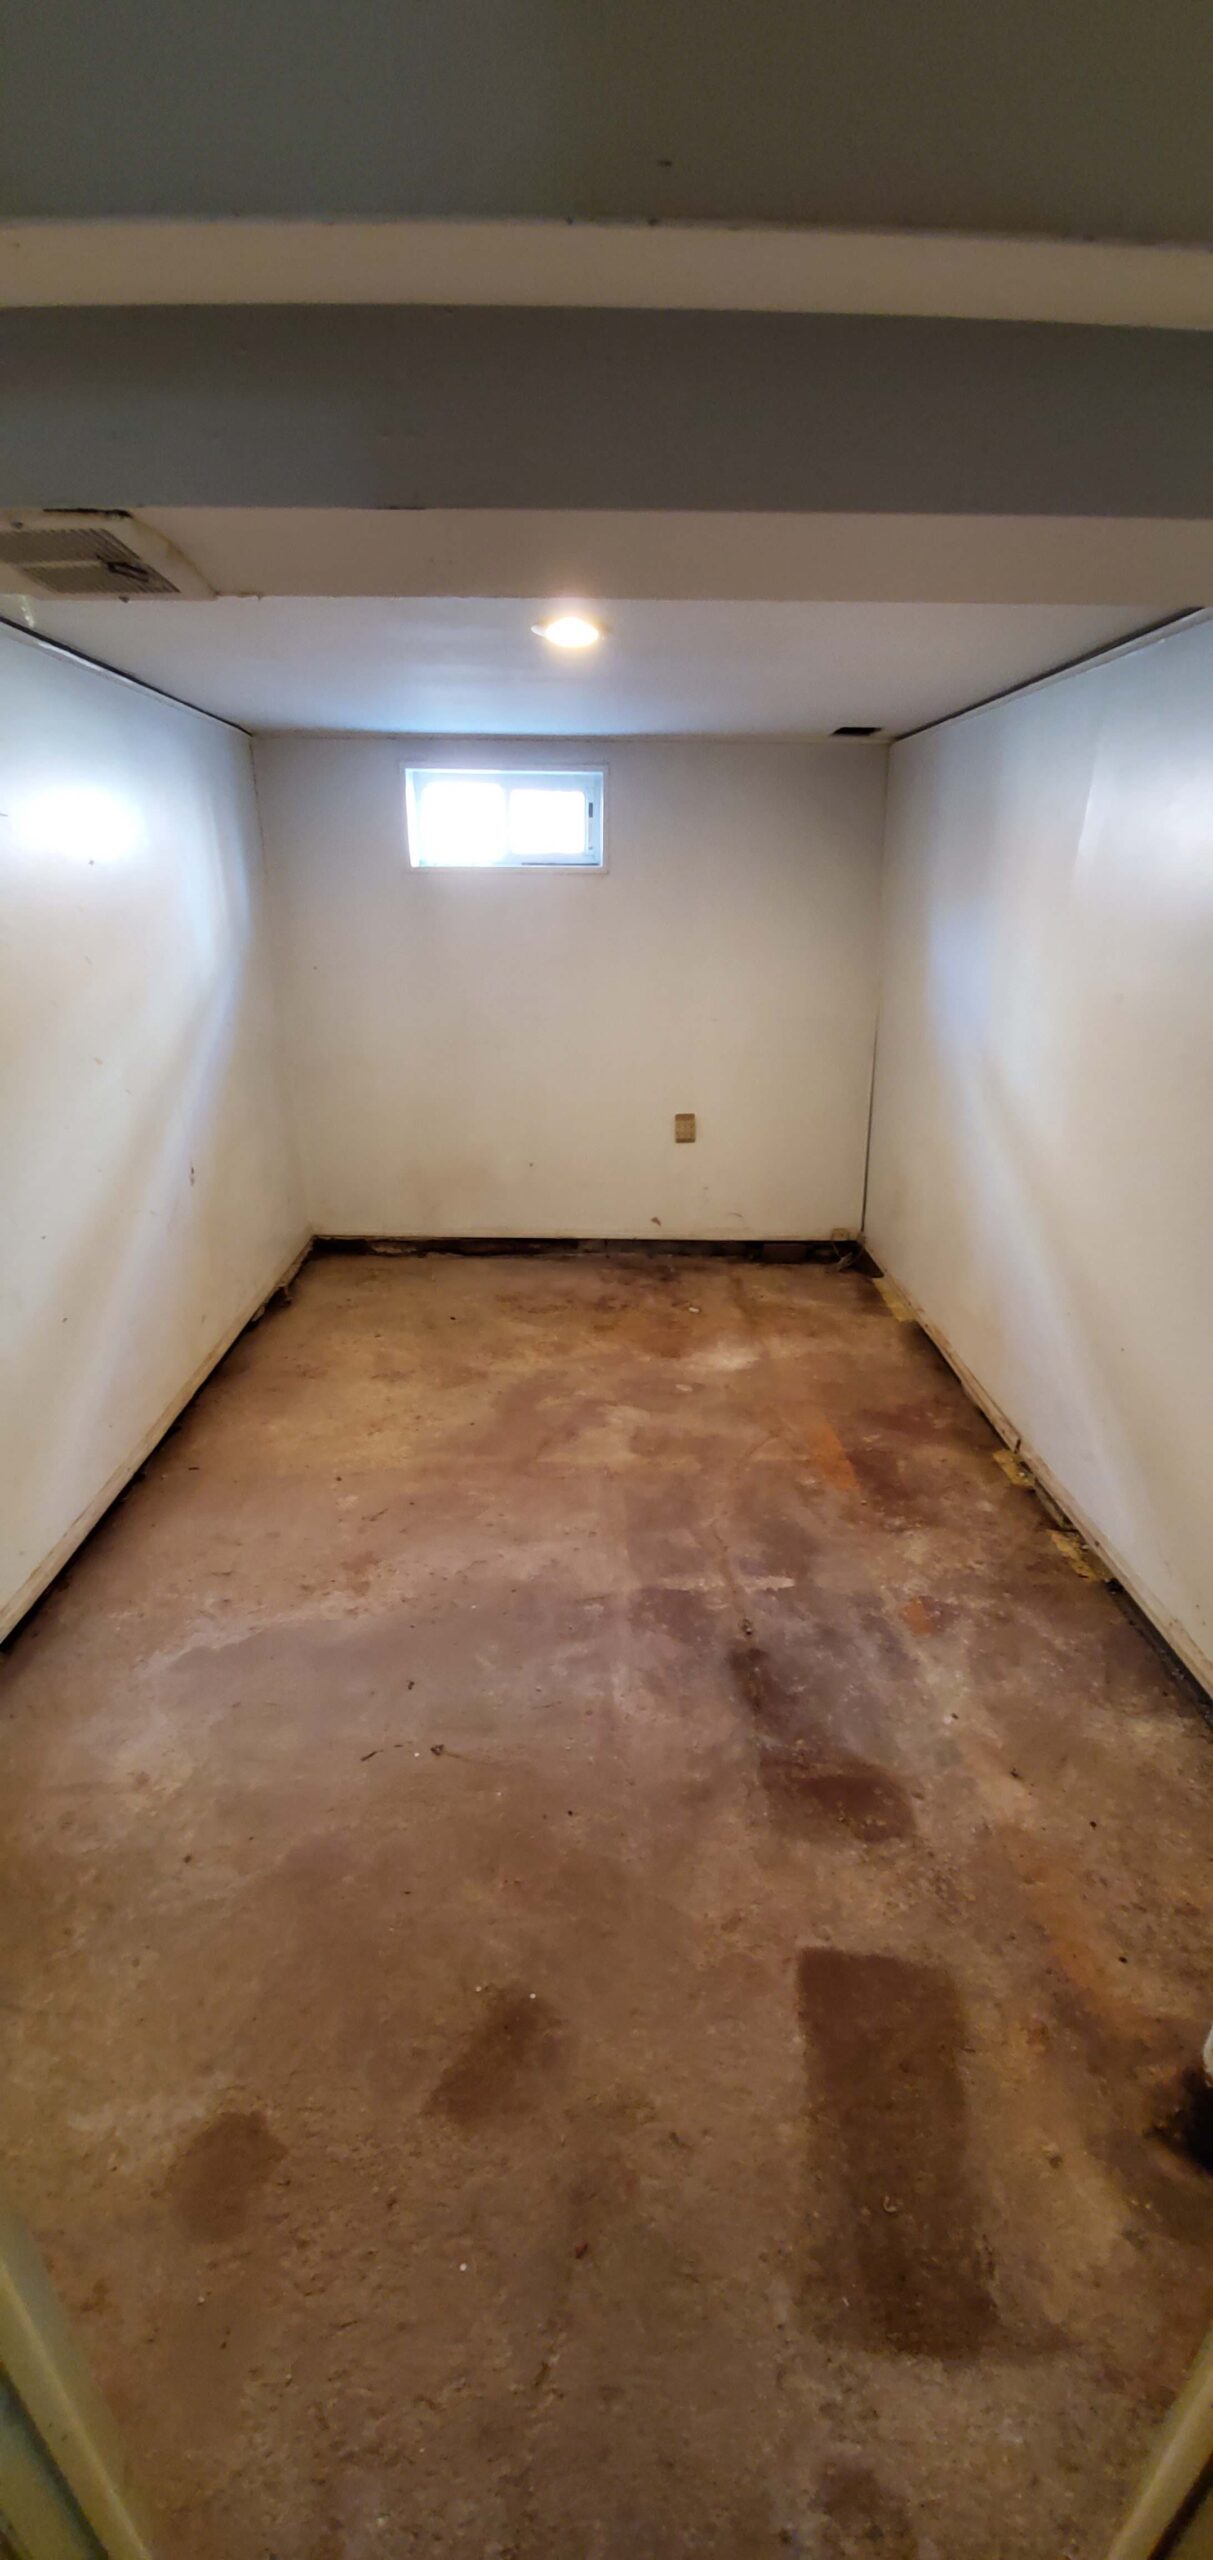 water fire mold restoration in queens ny 11414